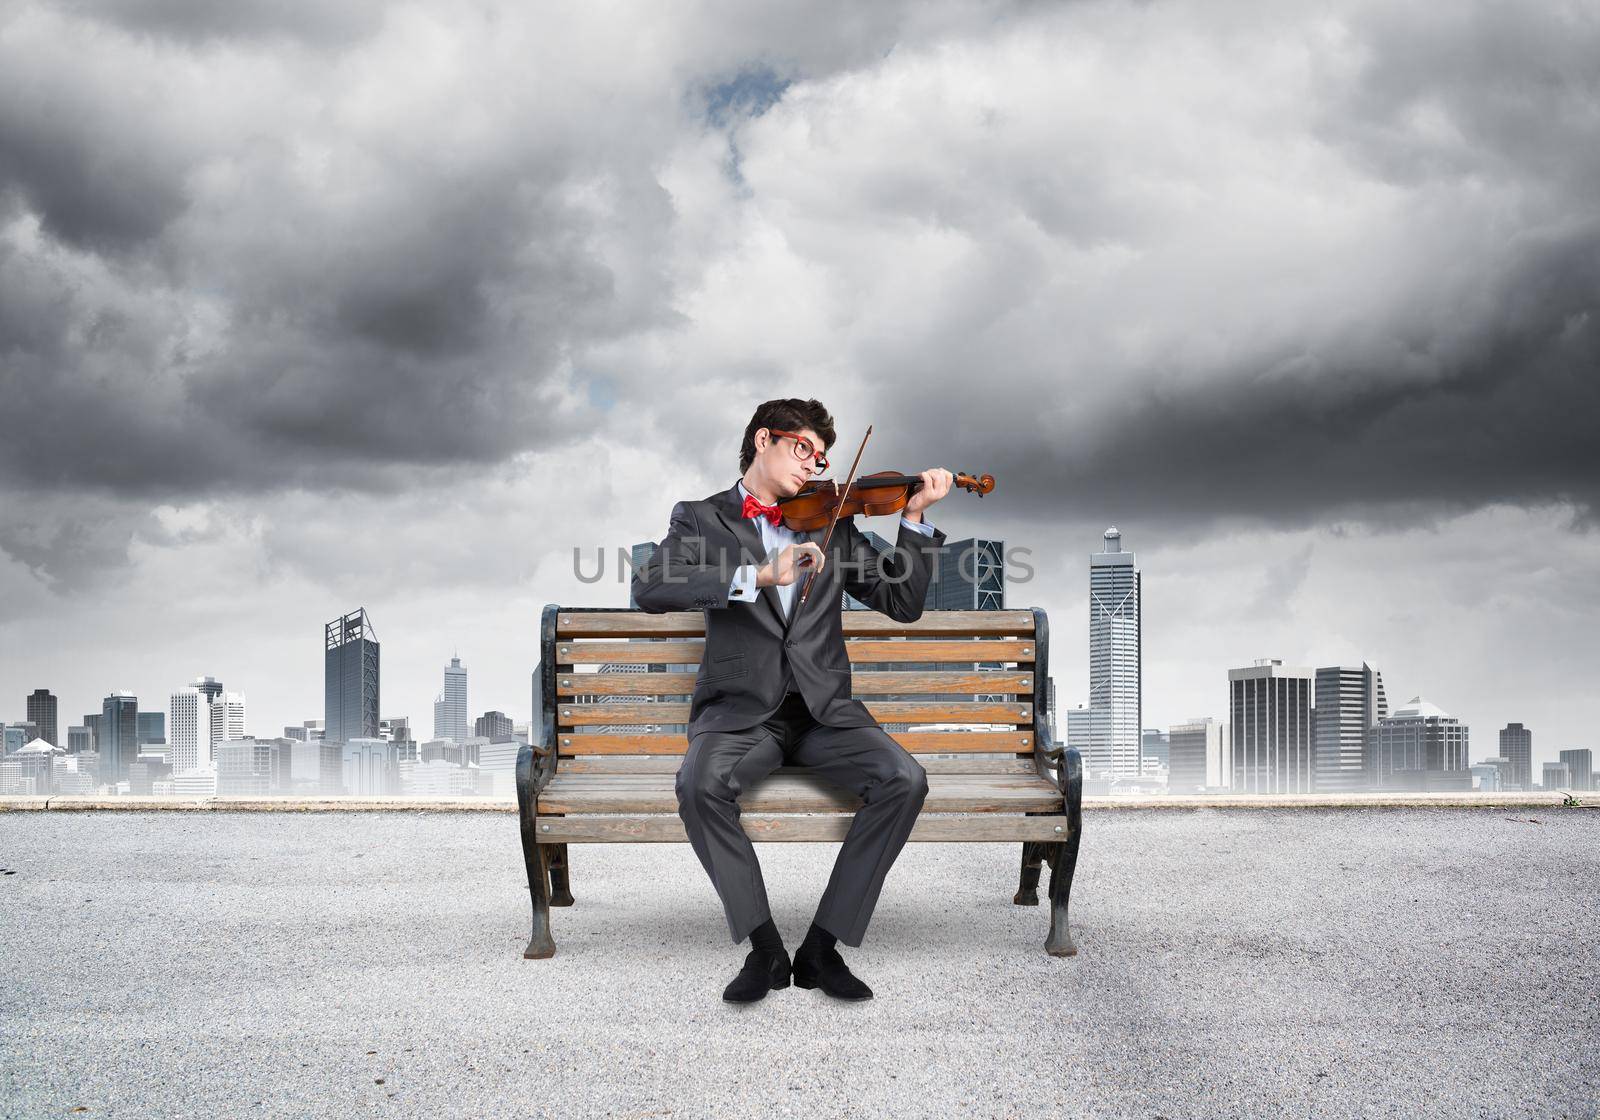 Young businessman plays the violin sitting on a wooden bench. Inspiration in business